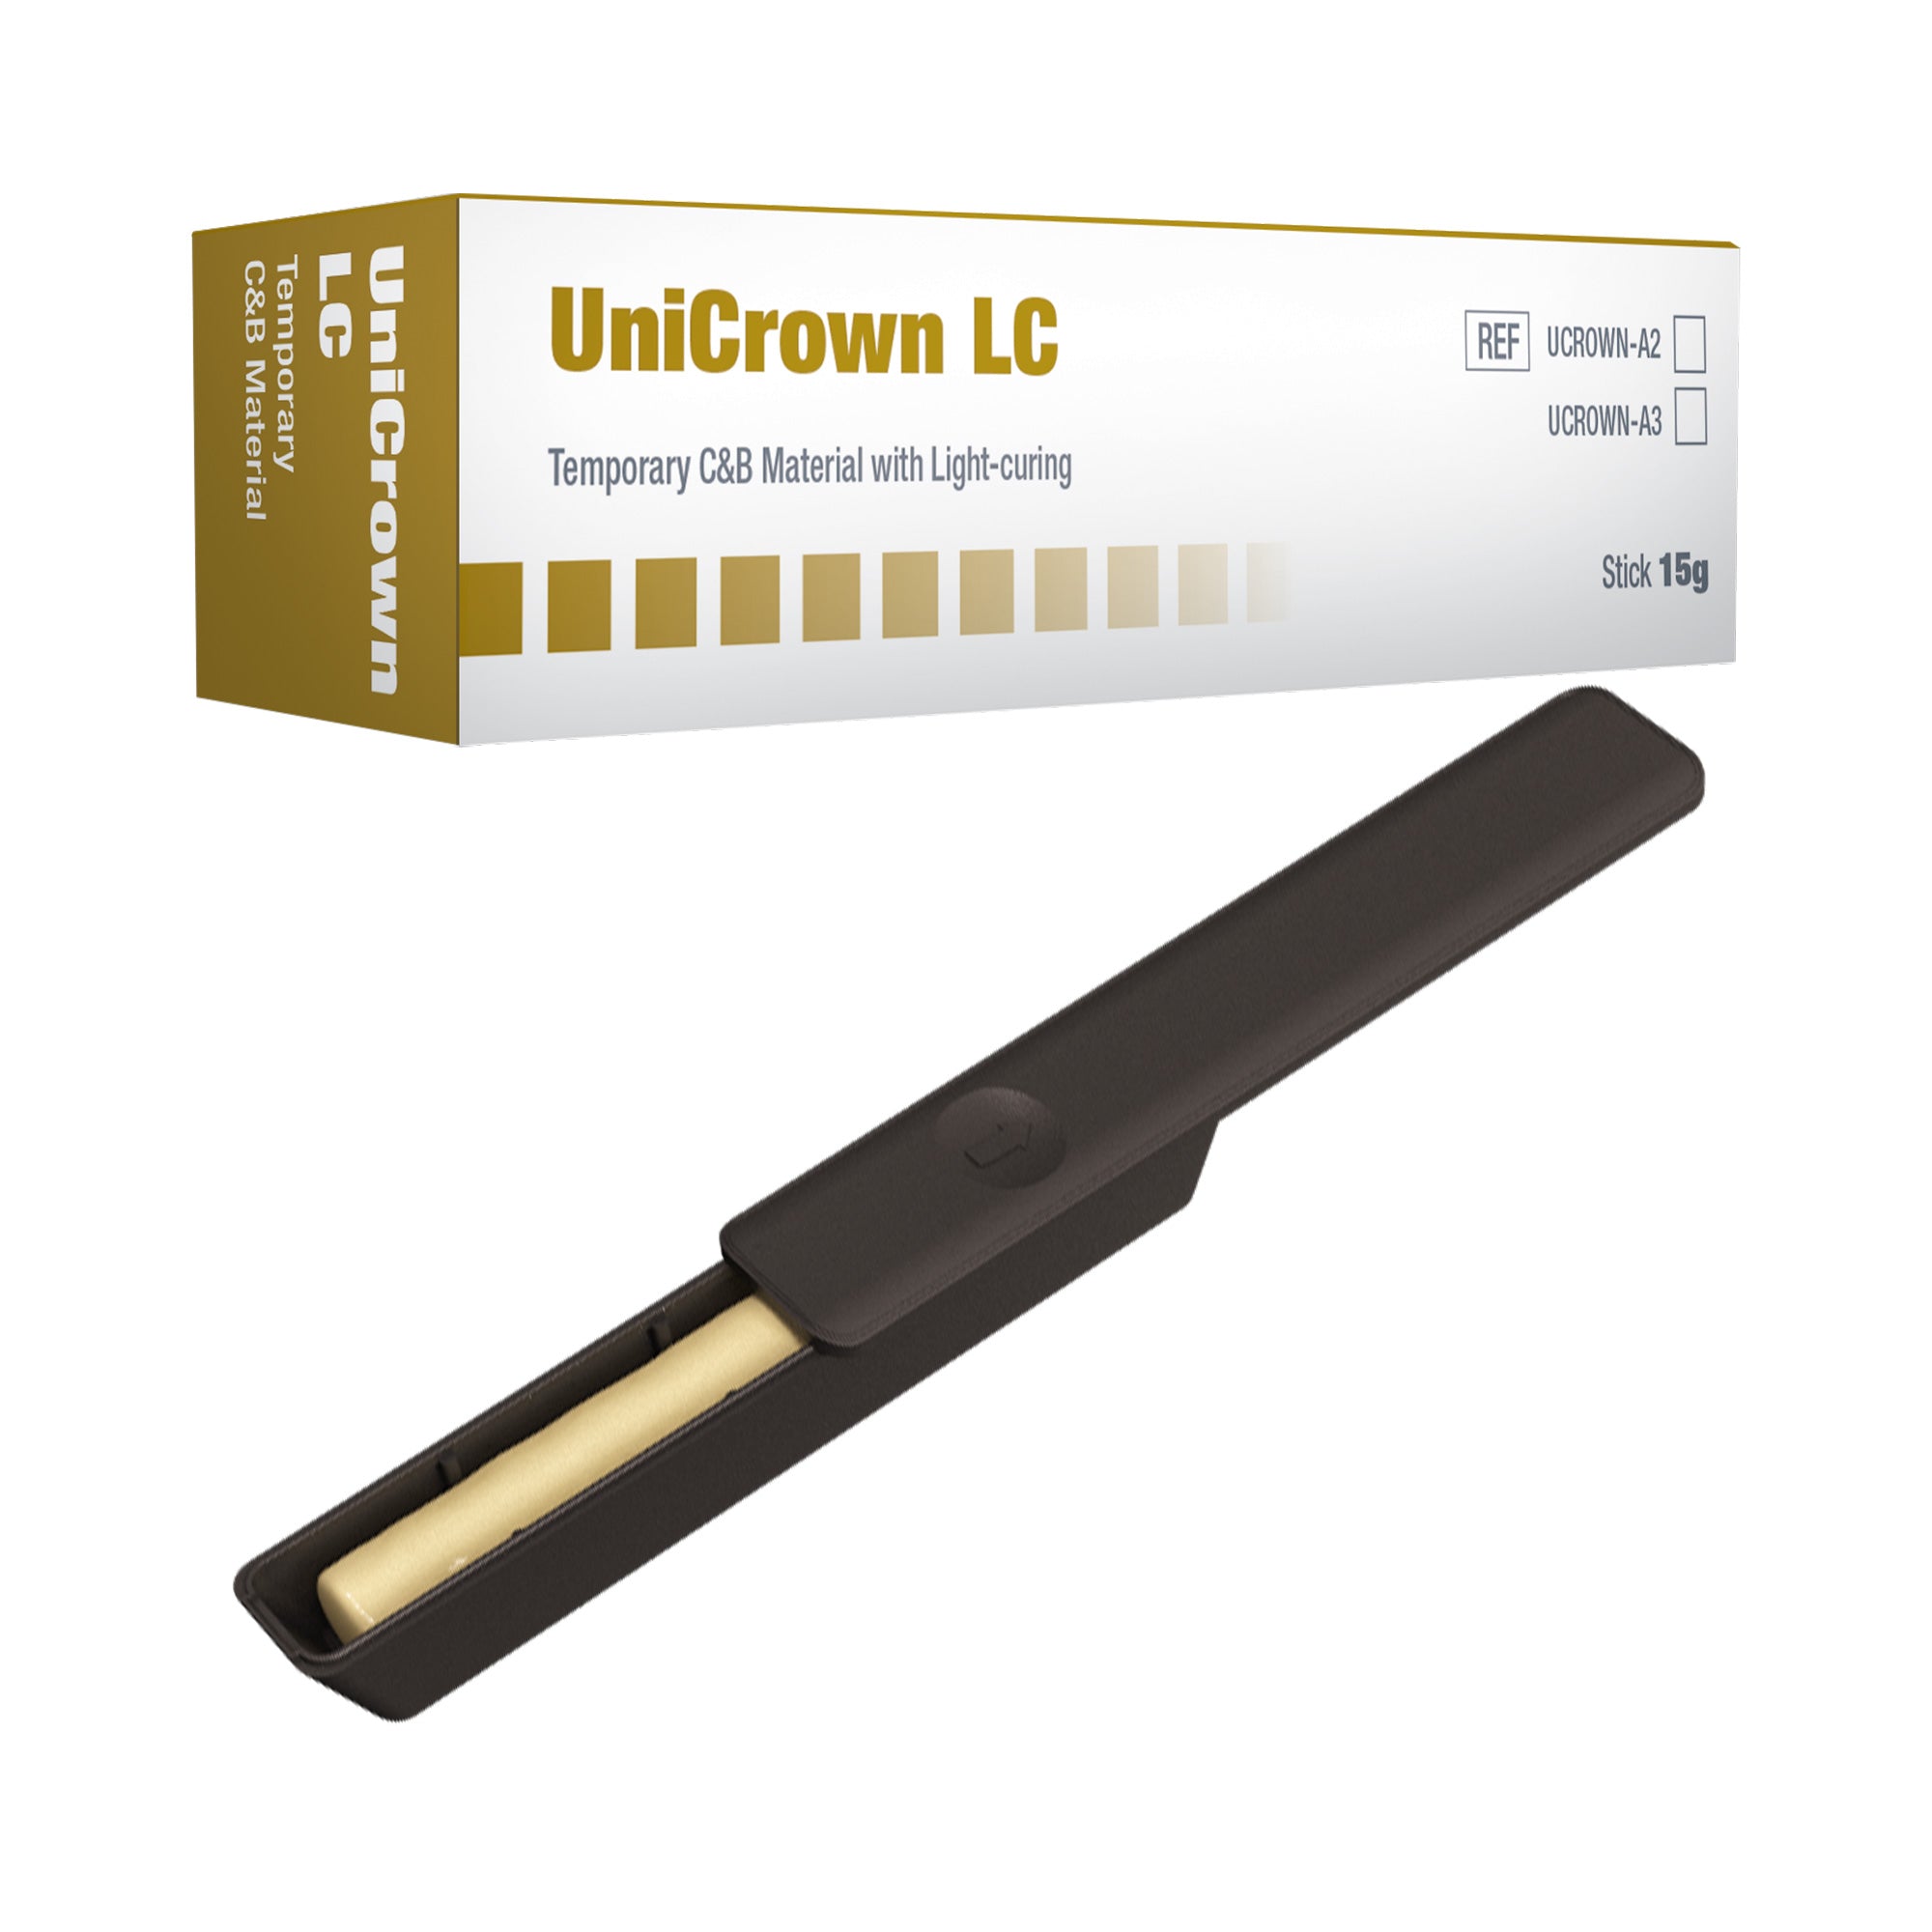 DSI UniCrown LC Light Curing Temporary Crown & Bridge Material 15g